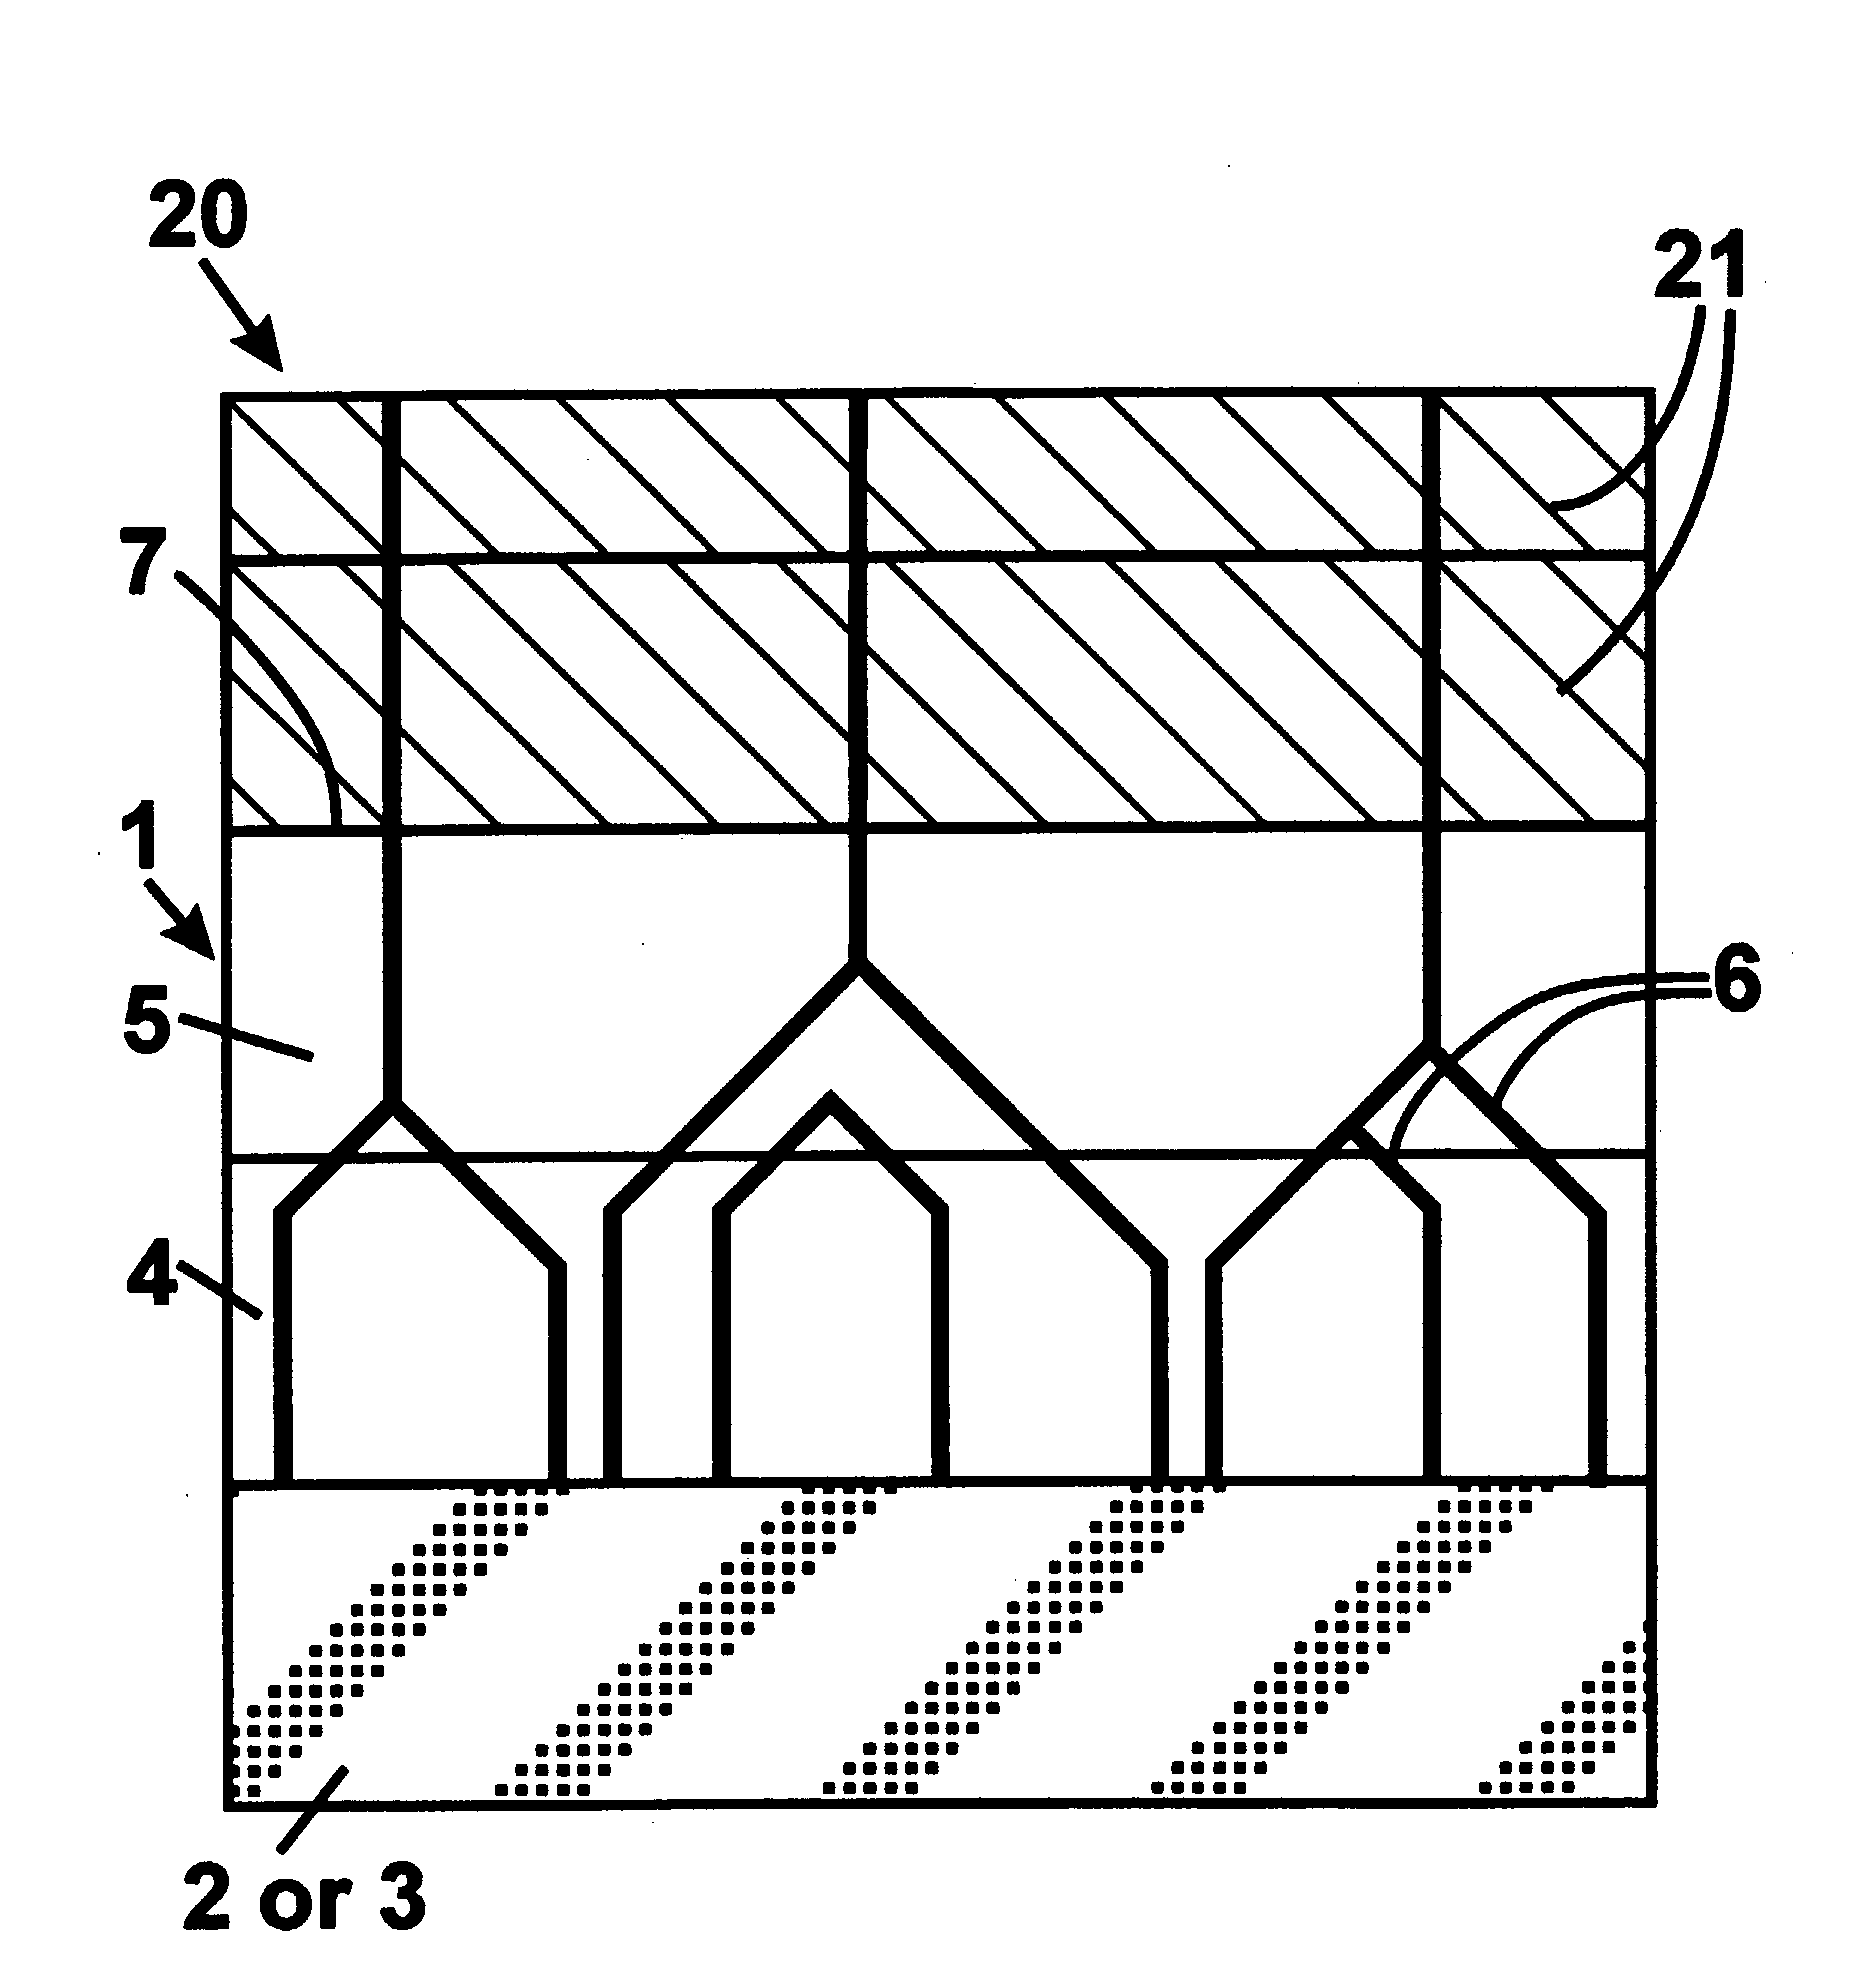 Semiconductor Substrate, Semiconductor Device and Method of Manufacturing a Semiconductor Substrate